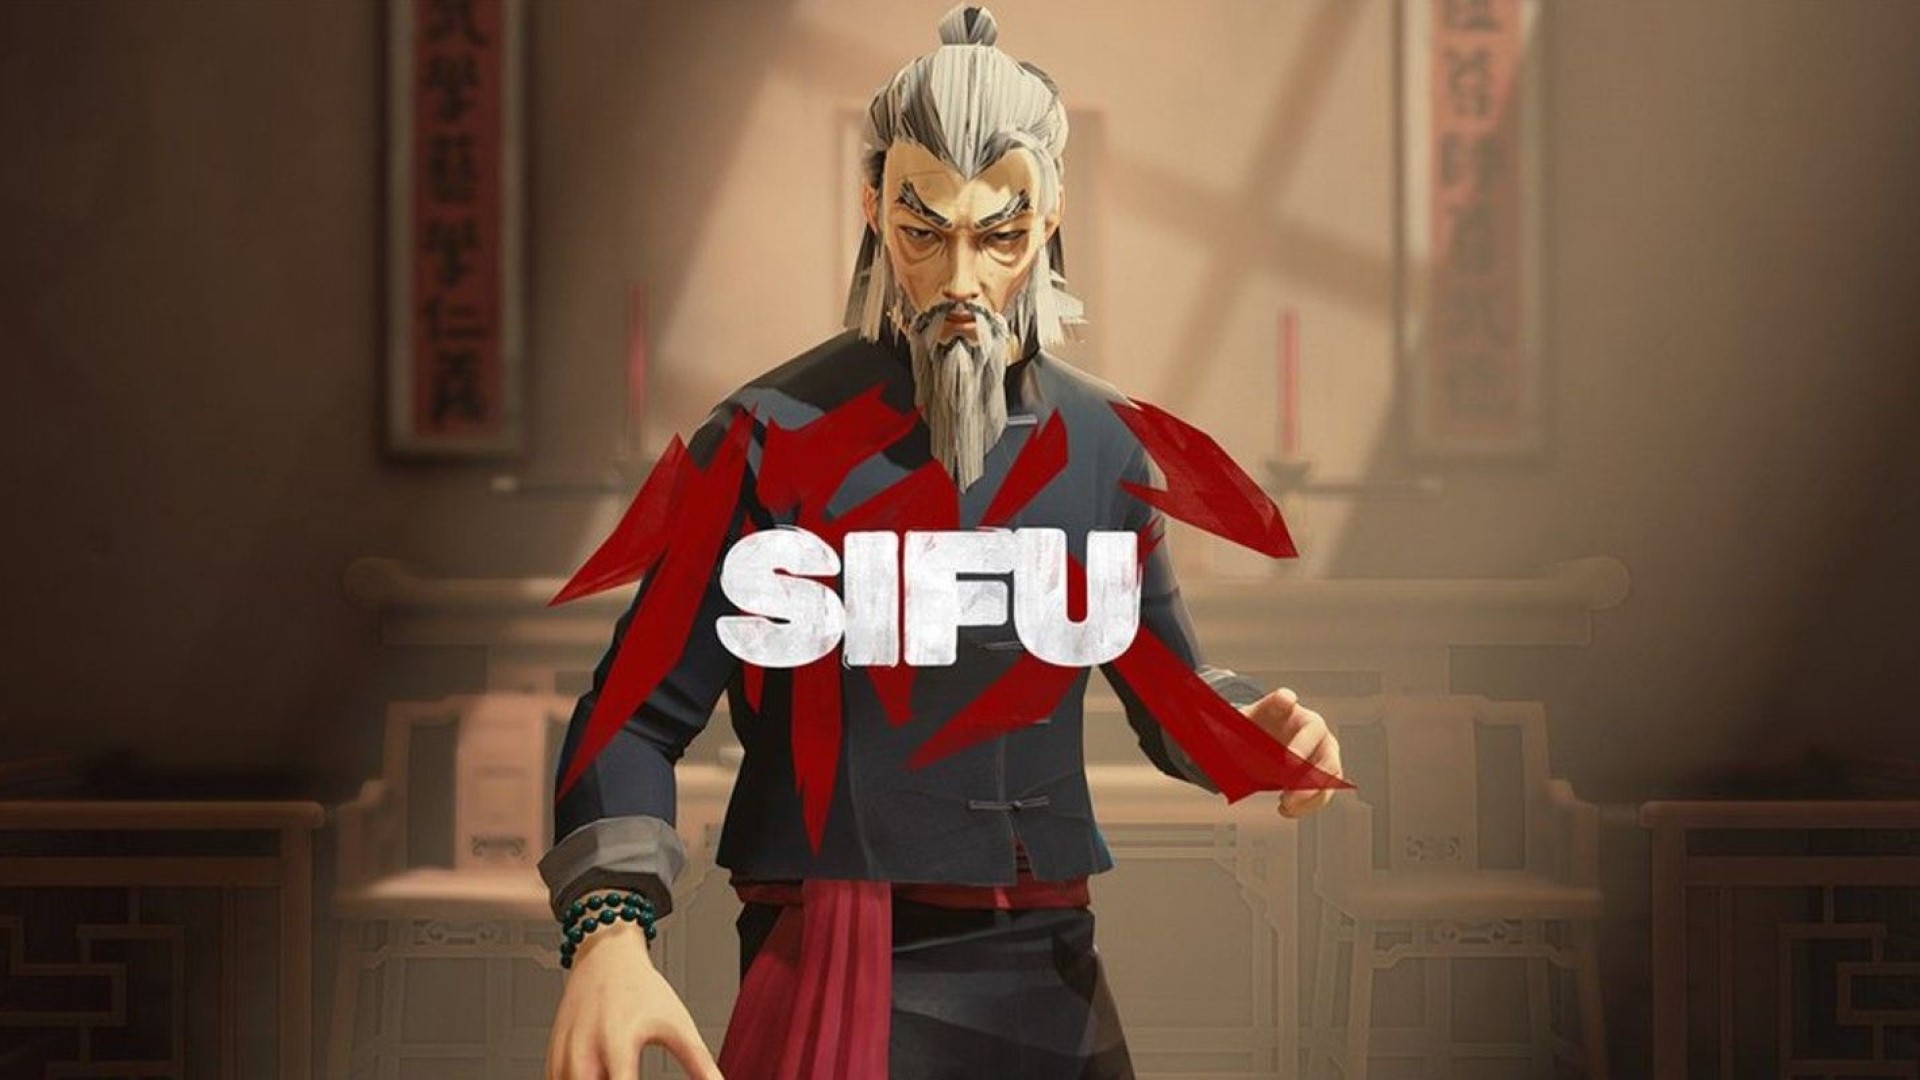 will sifu be on ps4